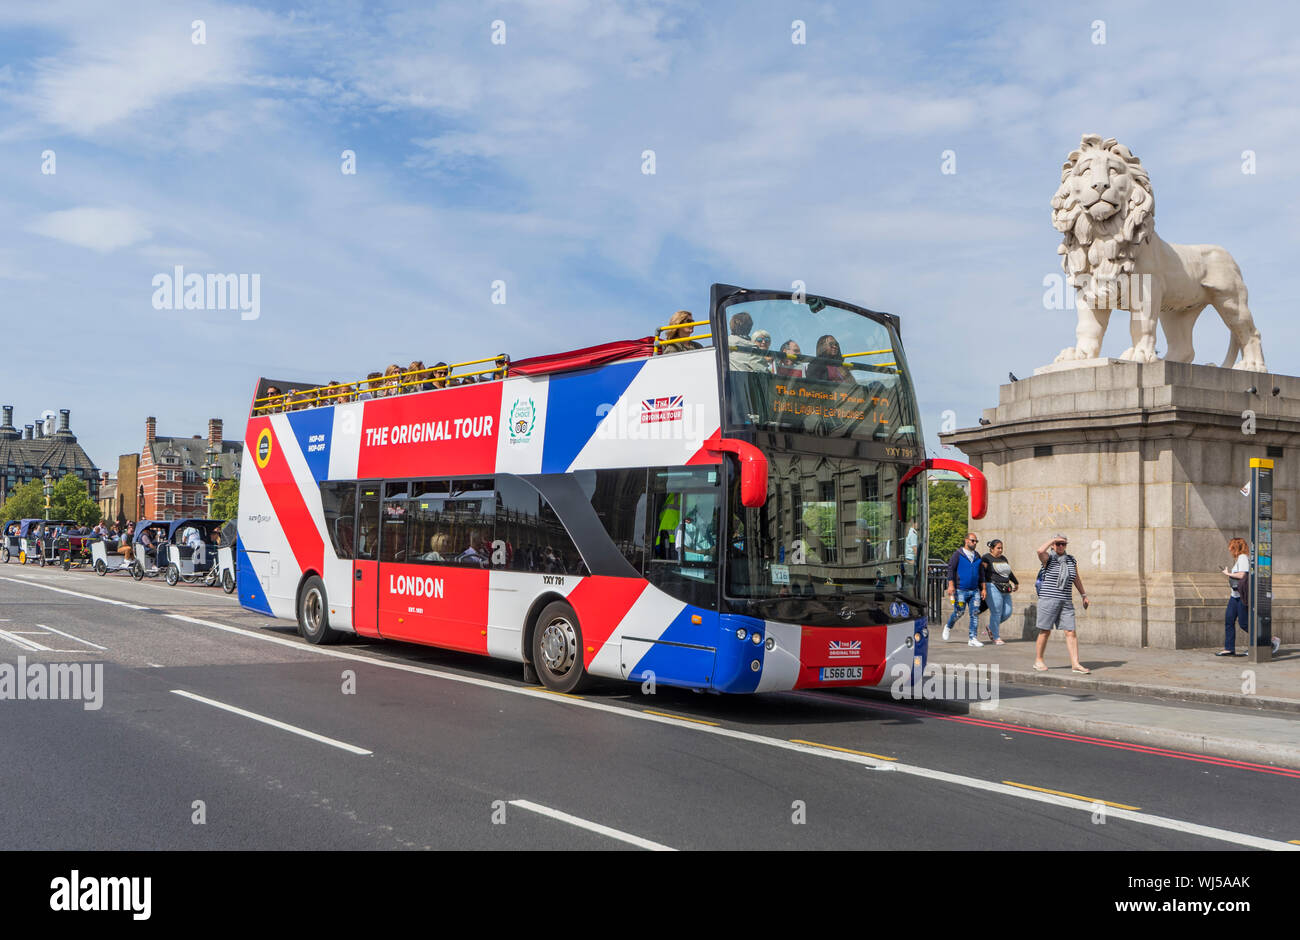 The Original Tour, a tour bus for sightseeing tourists to see London from an open top tours bus on Westminster Bridge, London, England, UK. Stock Photo